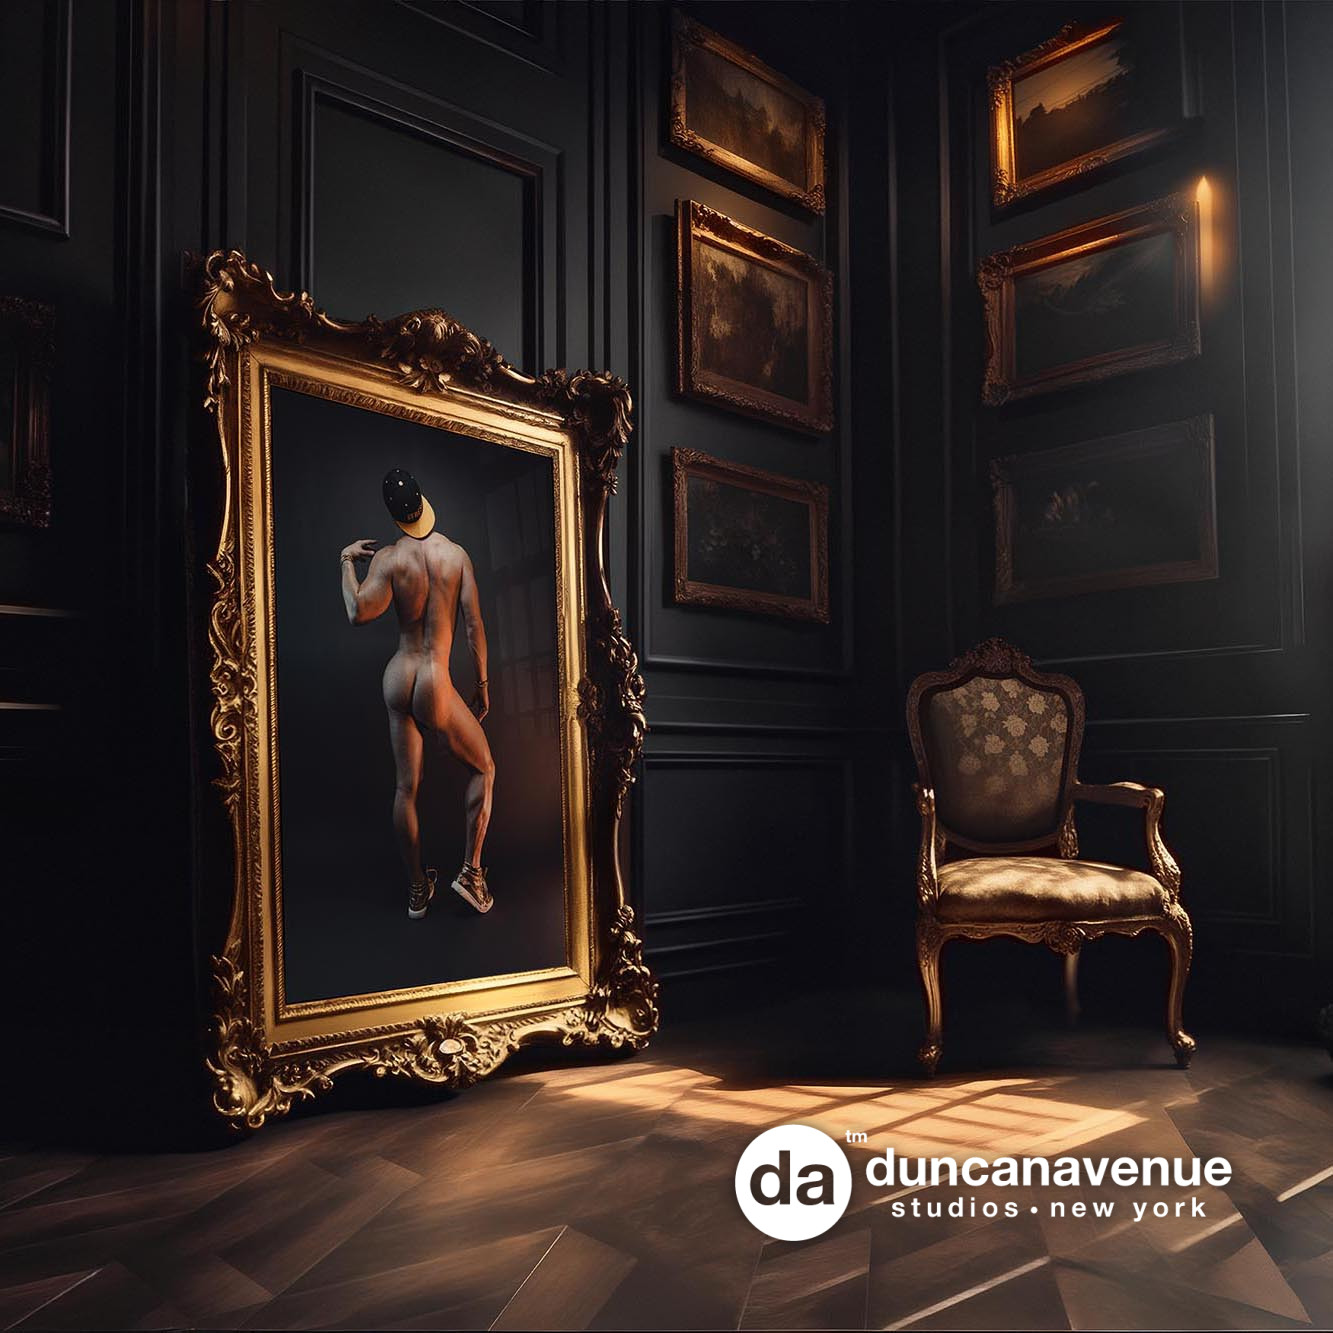 Discovering the Best Male Boudoir Photography and Homoerotic Art Galleries in the GUY STYLE MAG